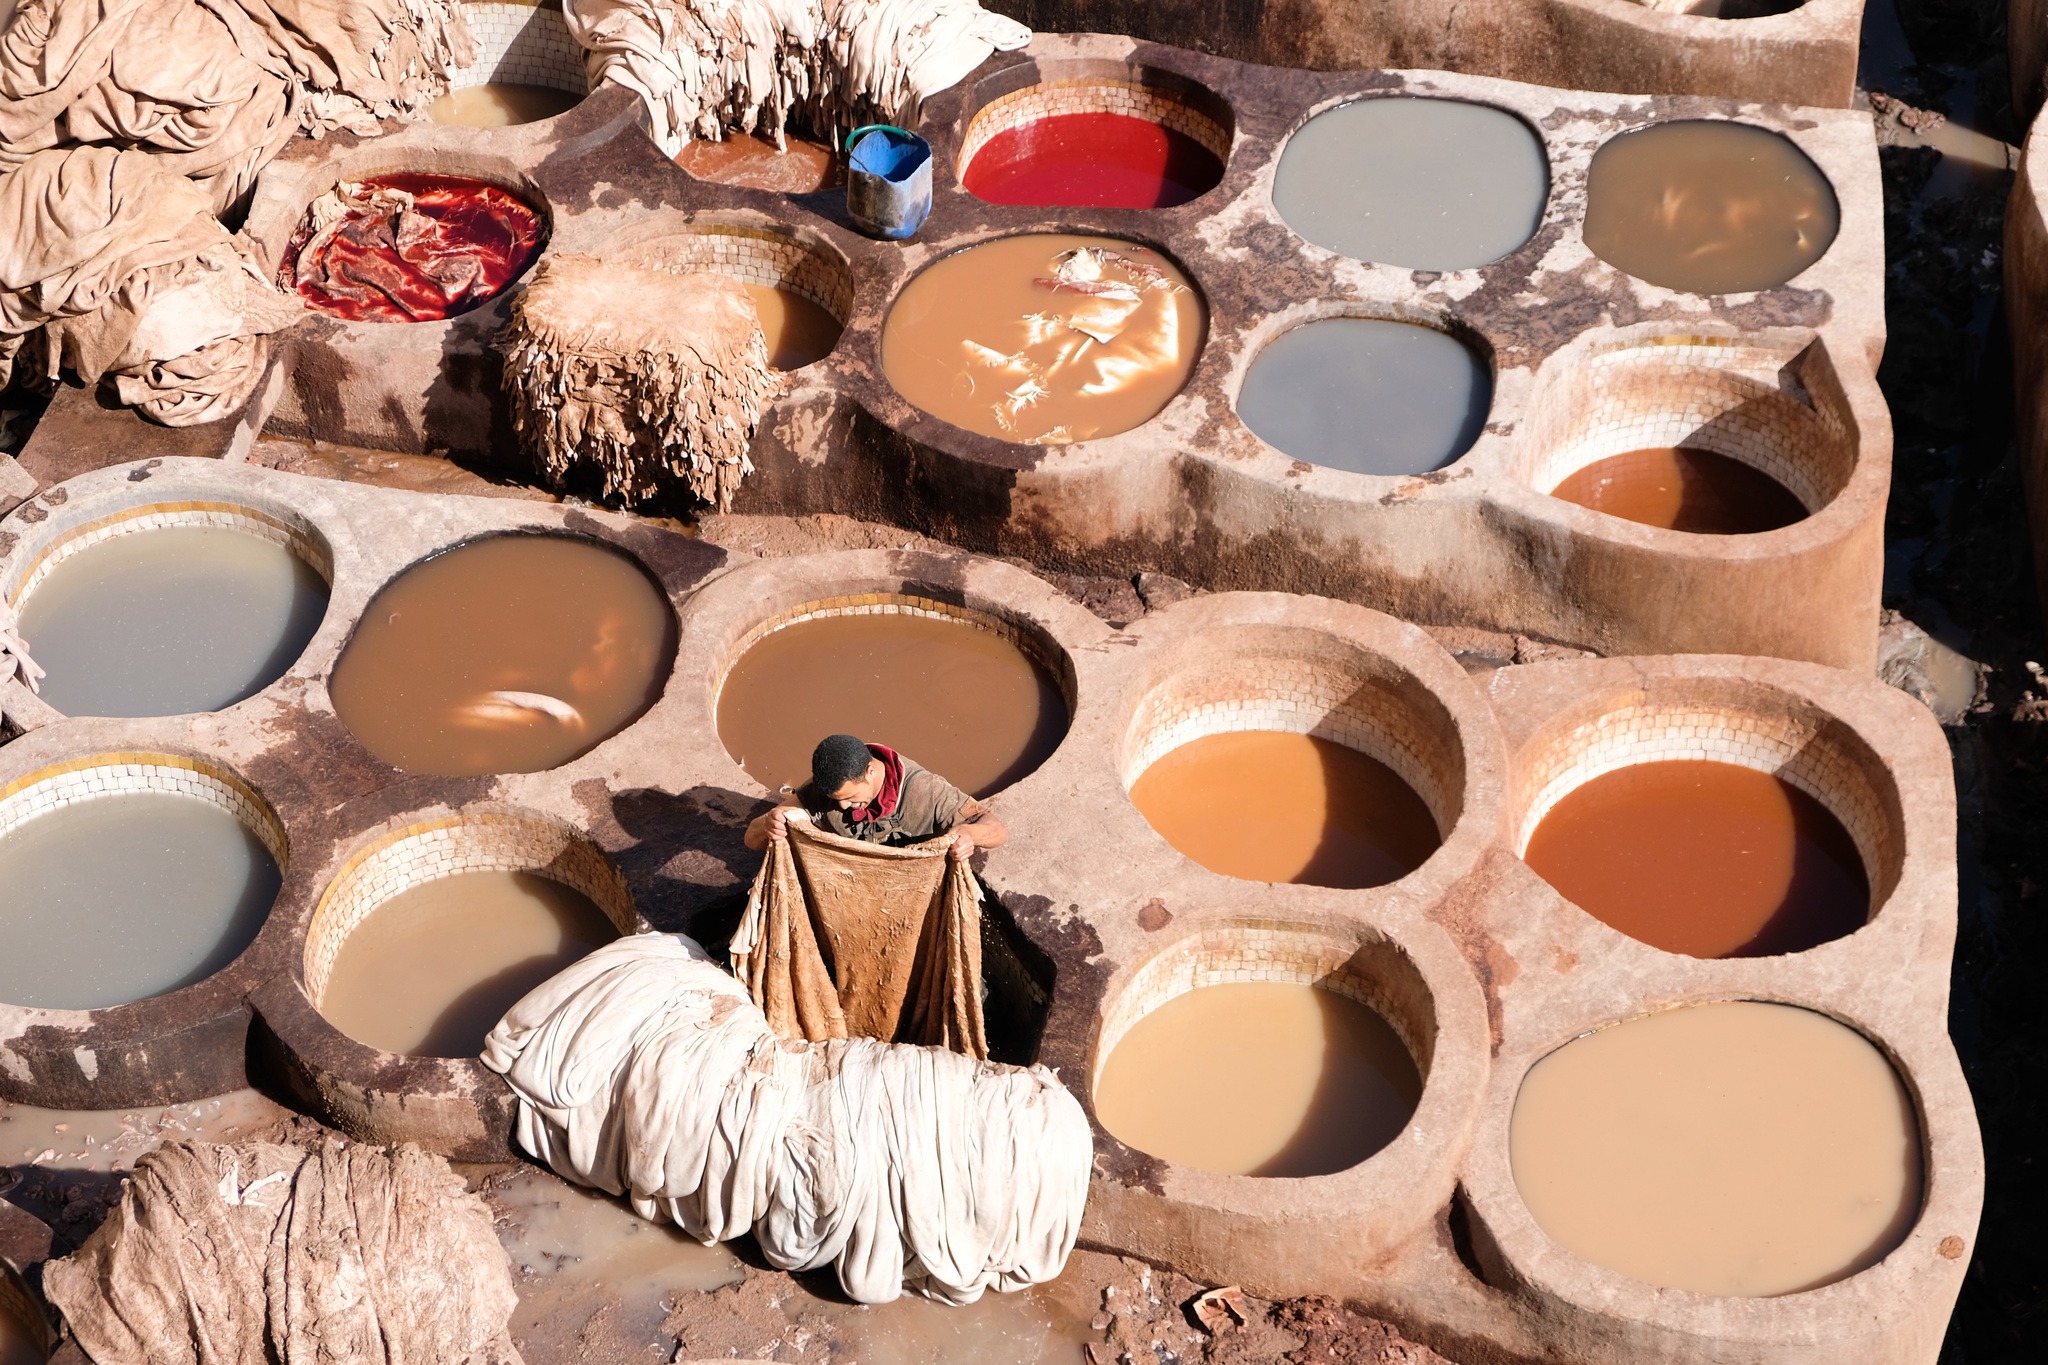 Worker in Morocco's Tanneries